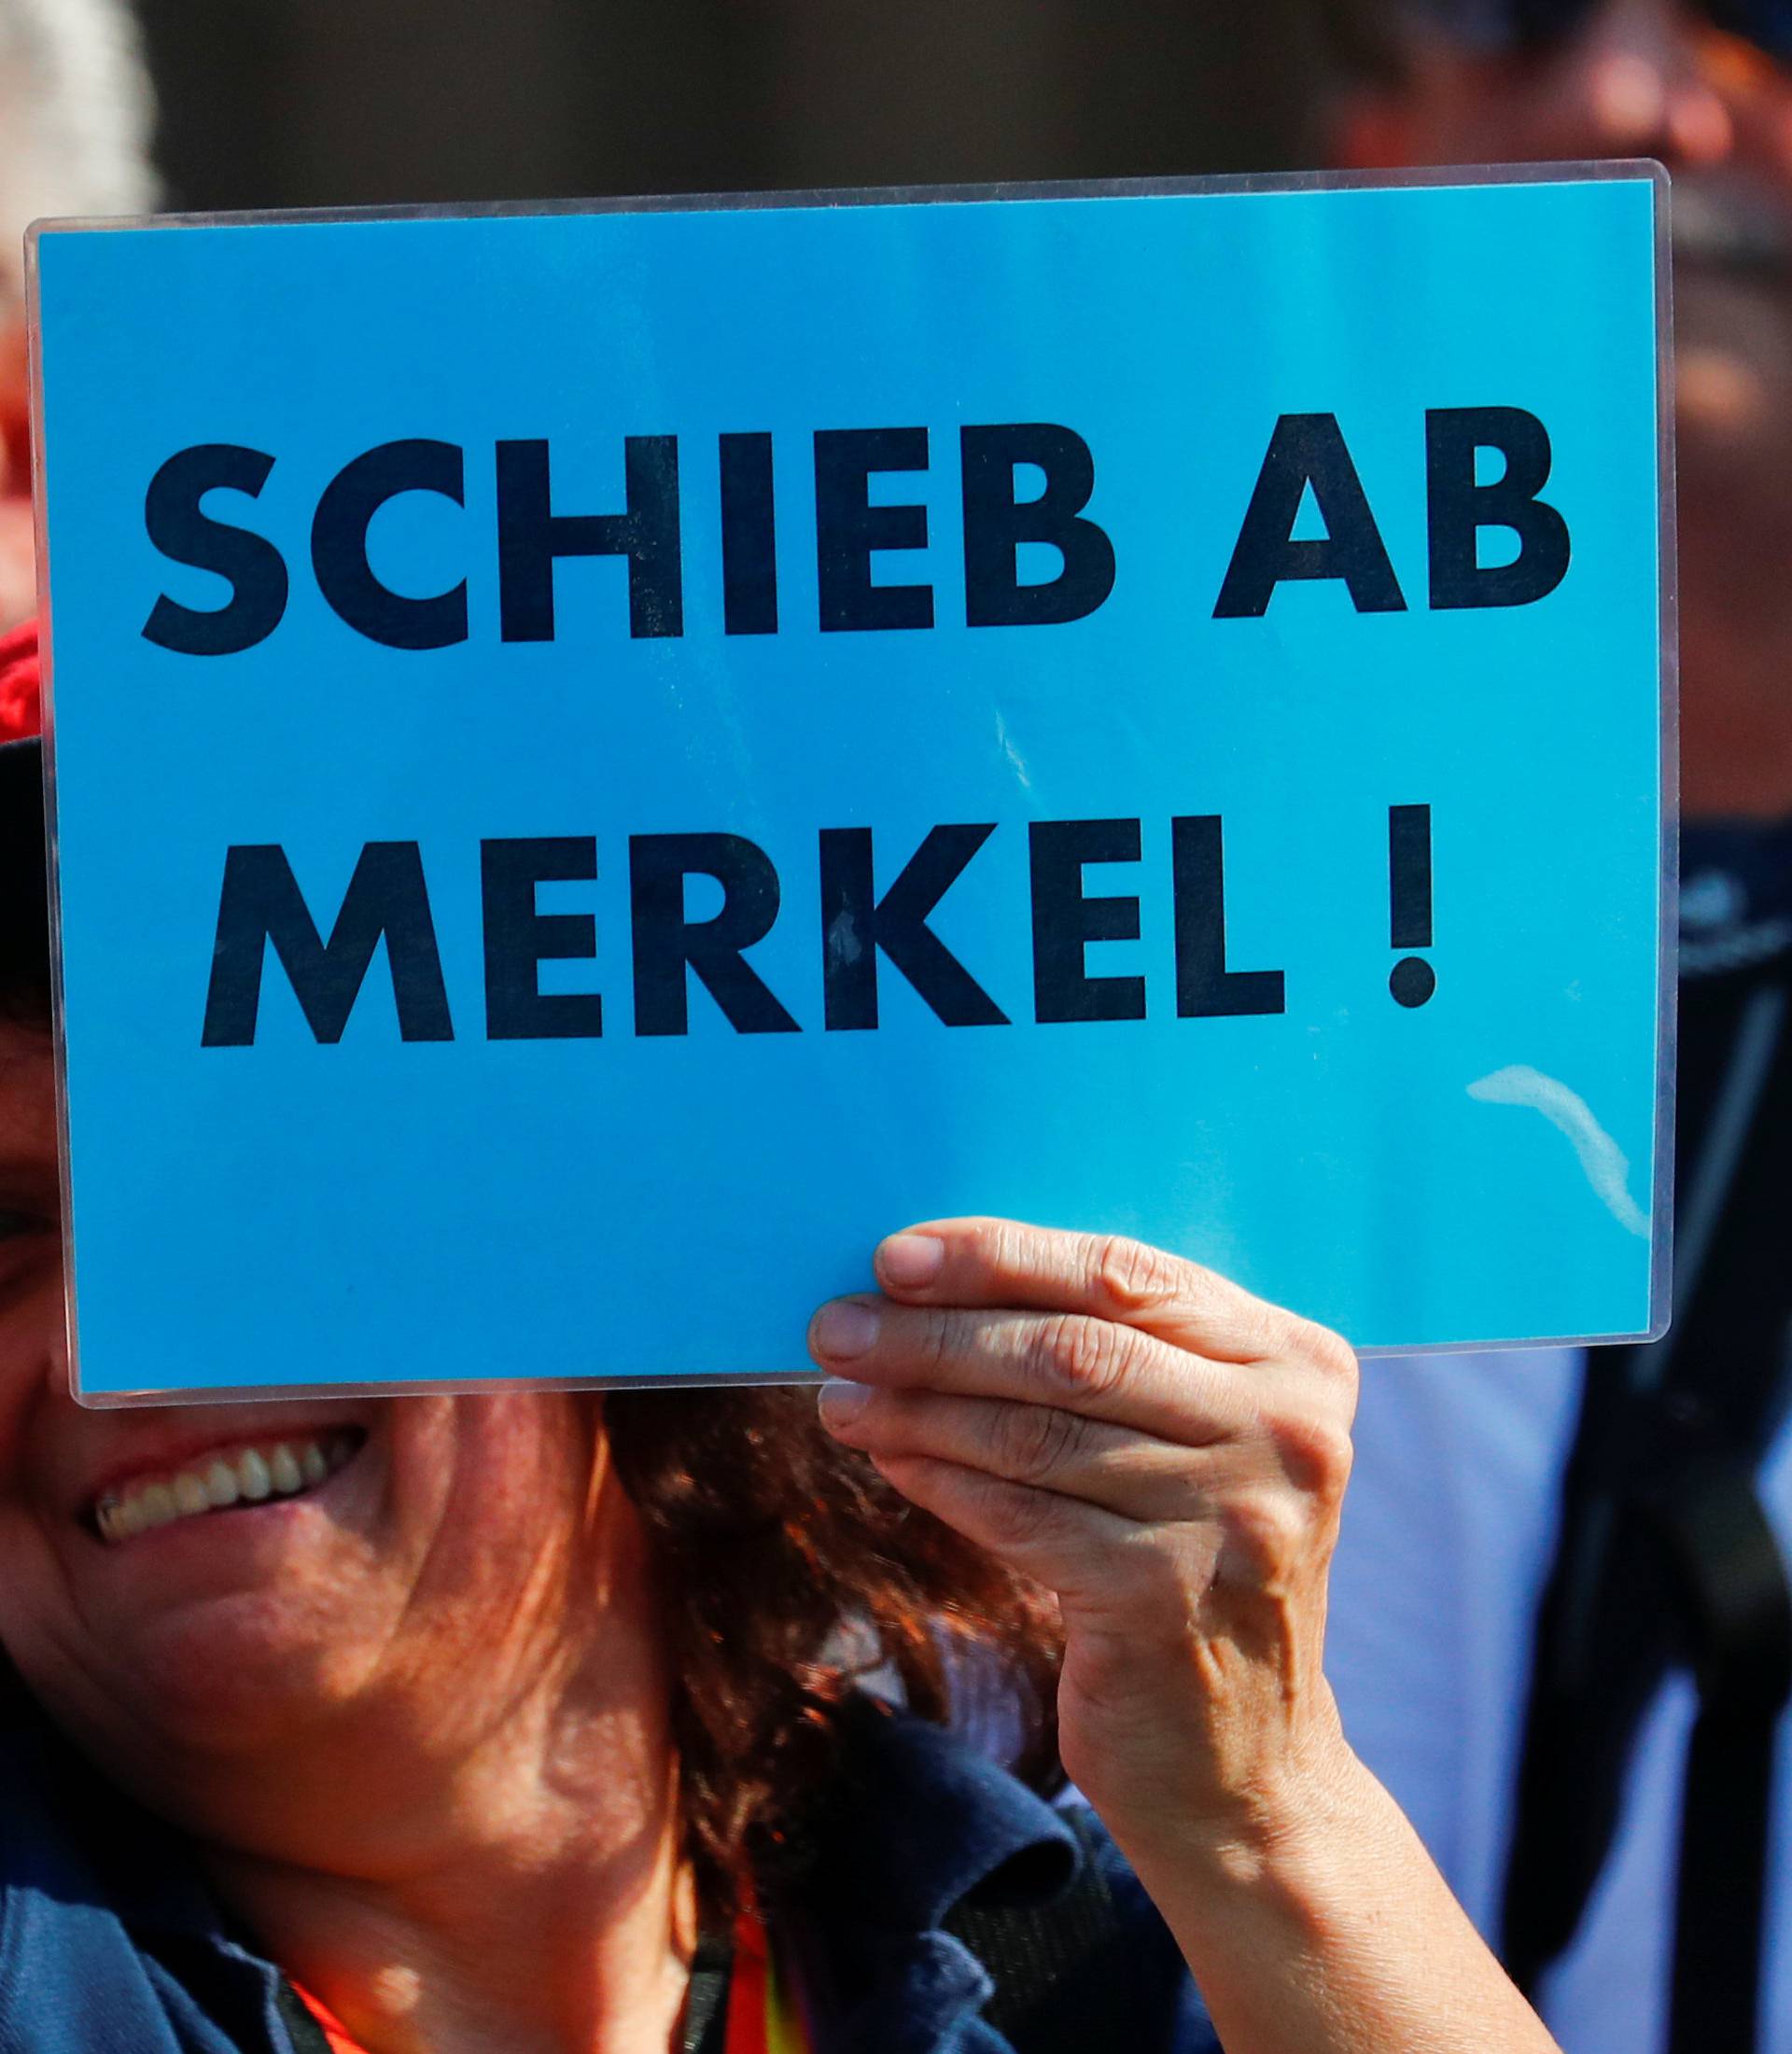 People take part in a protest against German Chancellor Angela Merkel as she visits the state parliament in Dresden